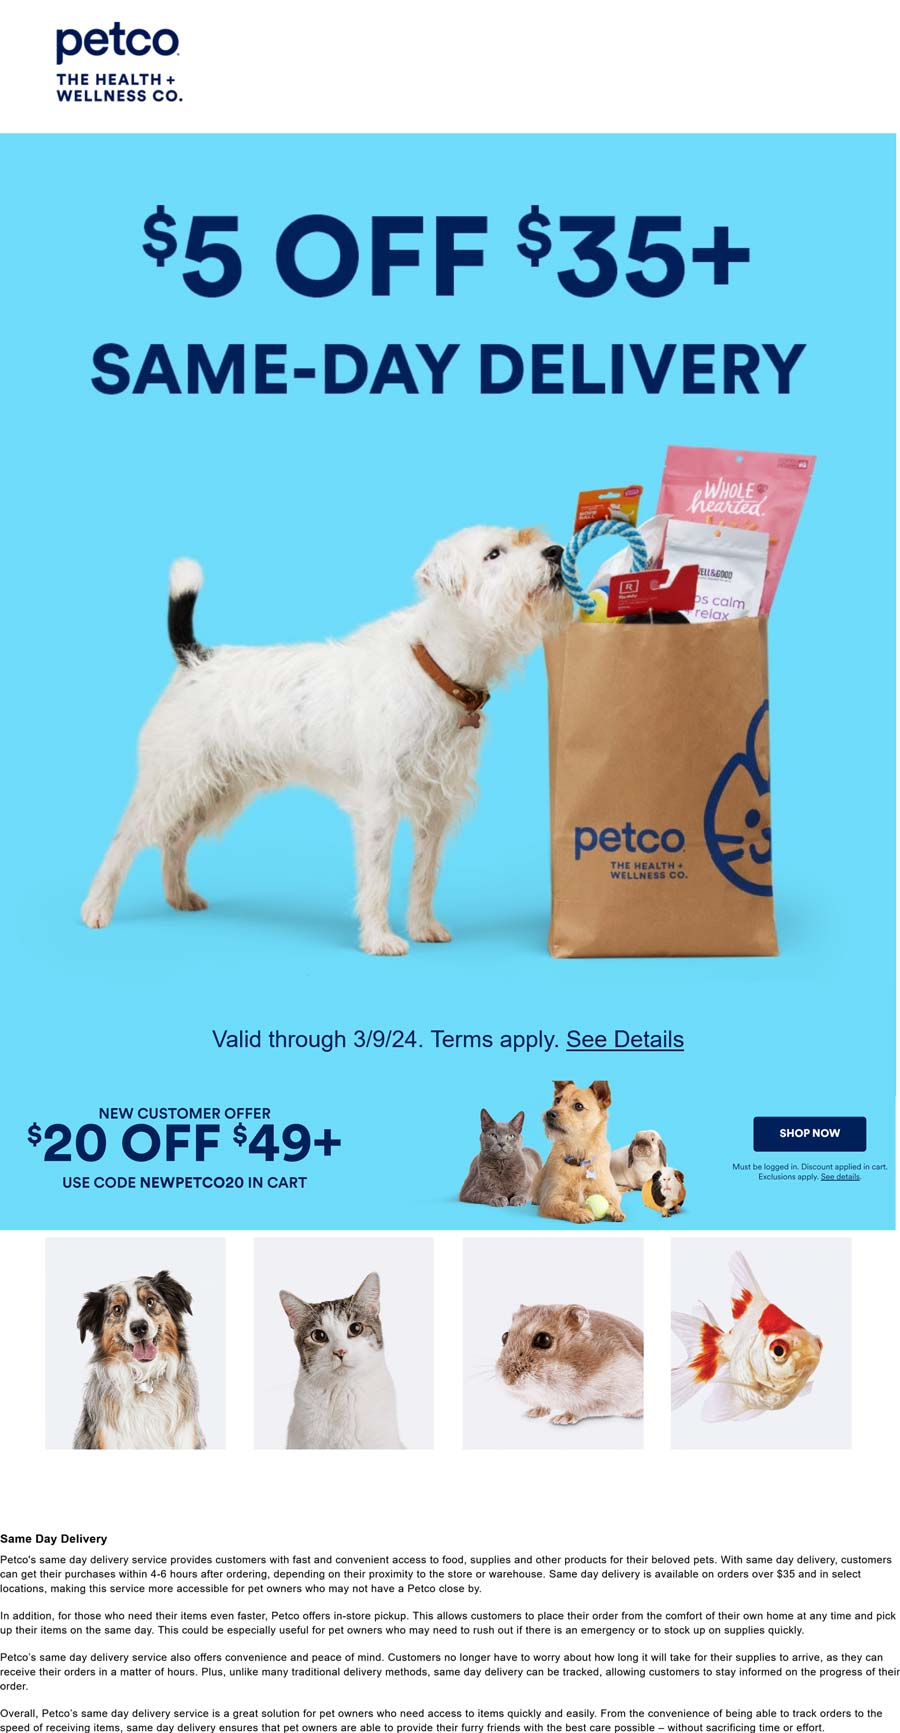 Petco stores Coupon  $5 off $35 on same-day delivery also $20 off $49 at Petco via promo code NEWPETCO20 #petco 